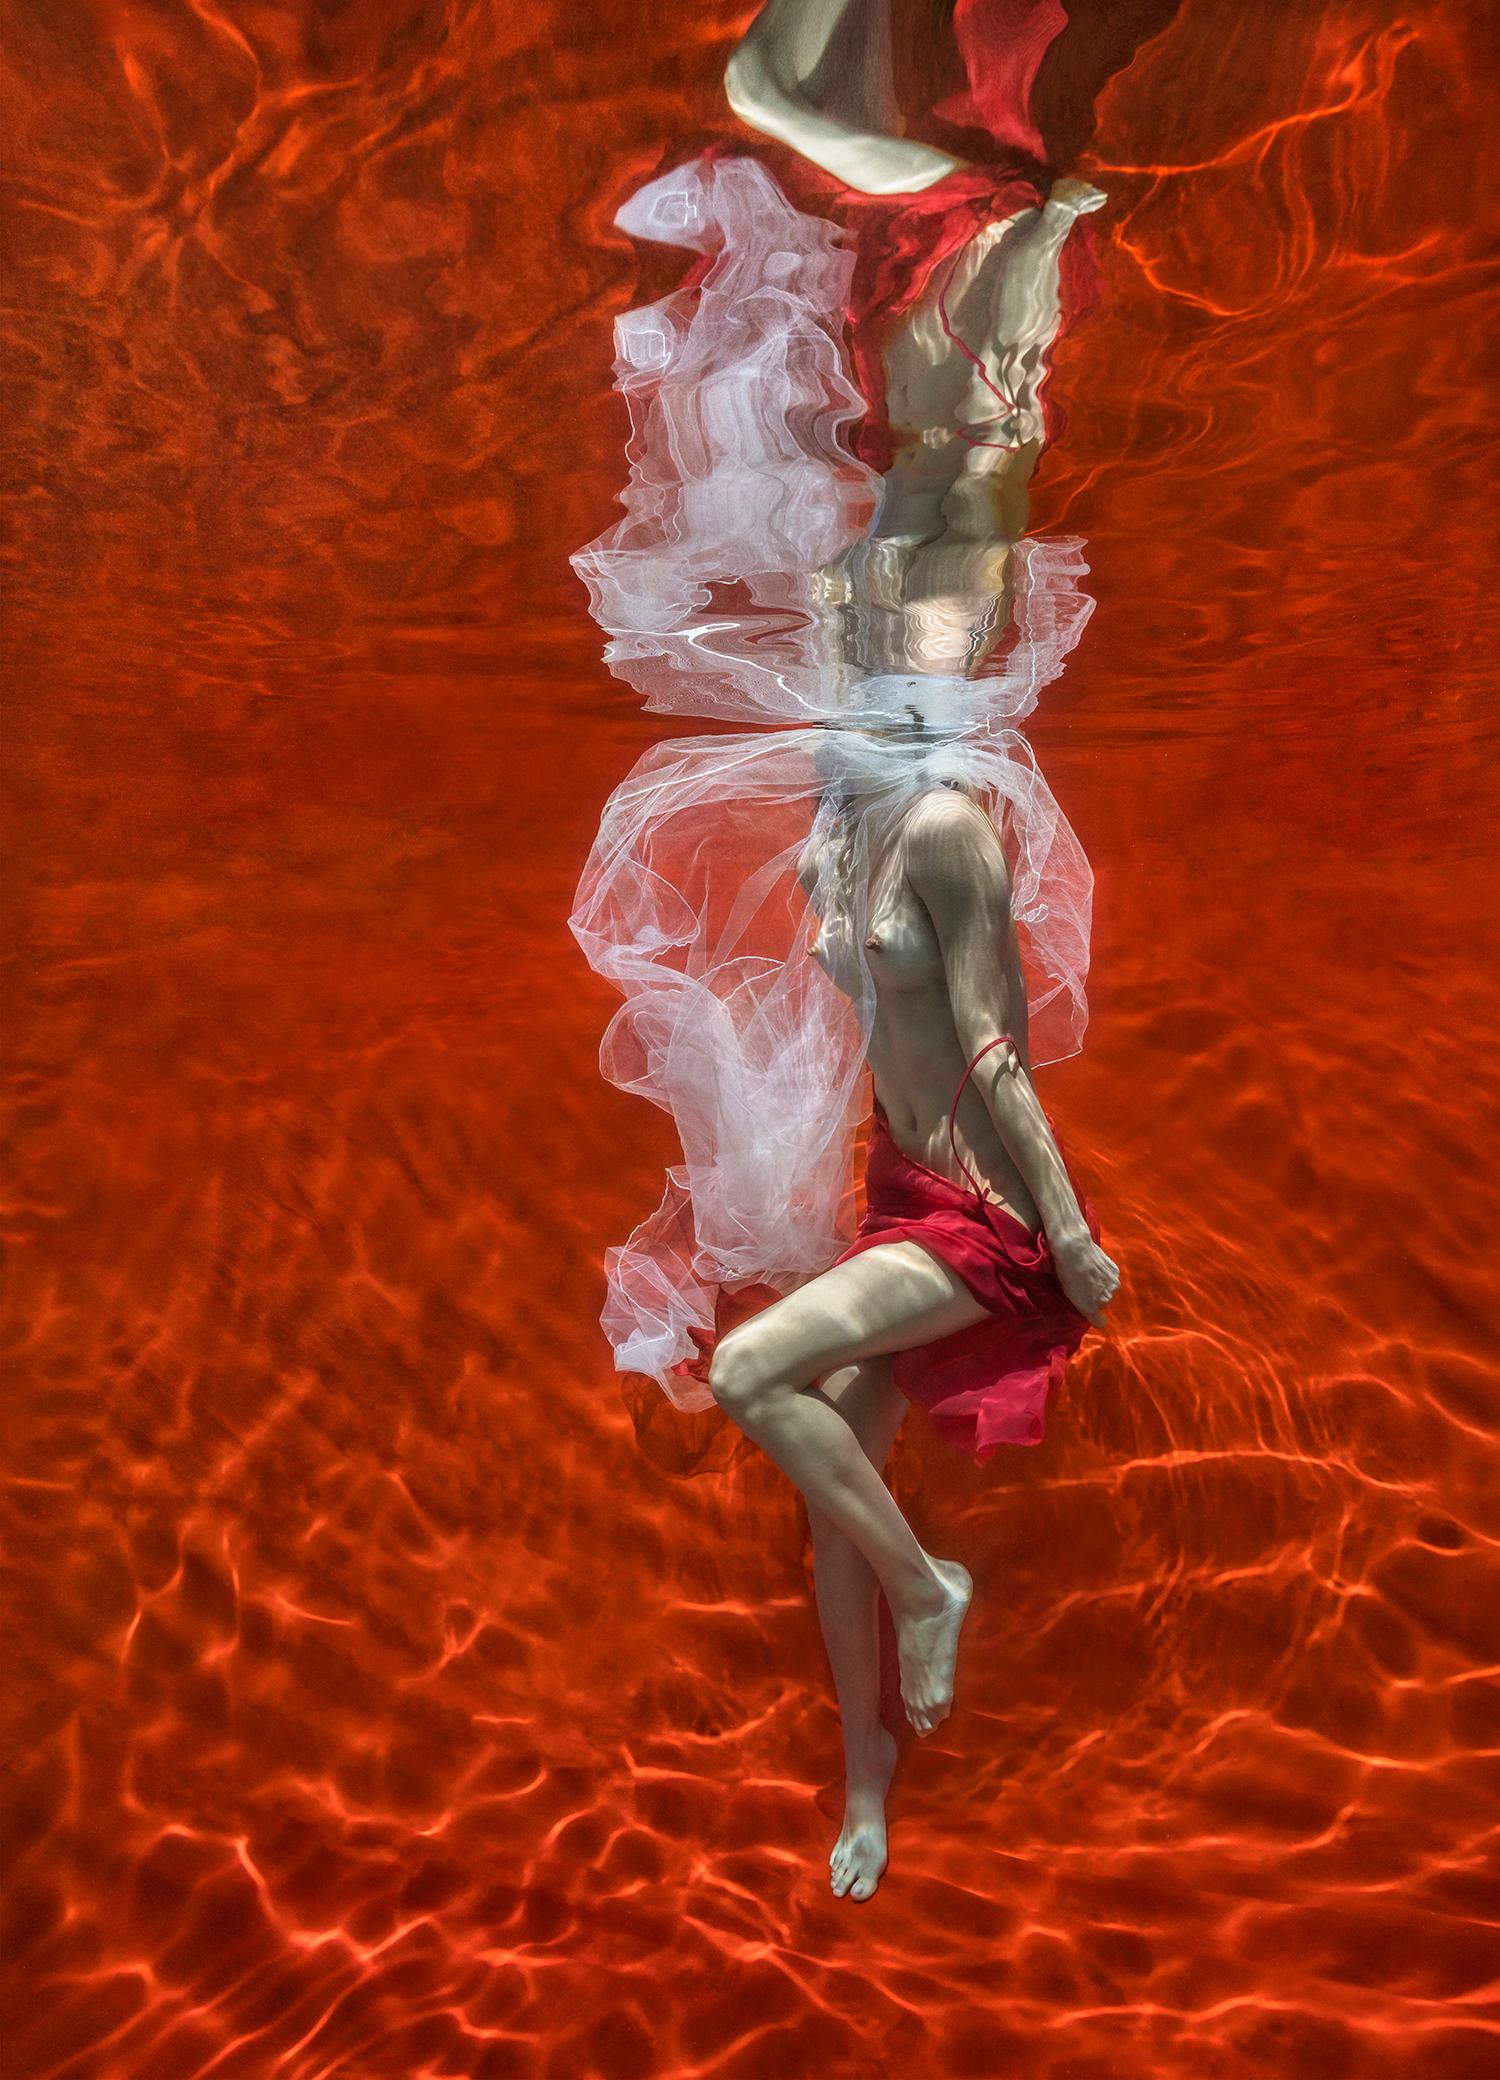 Alex Sher Color Photograph - Blood and Milk III - underwater nude photograph - print on paper 35 x 25"